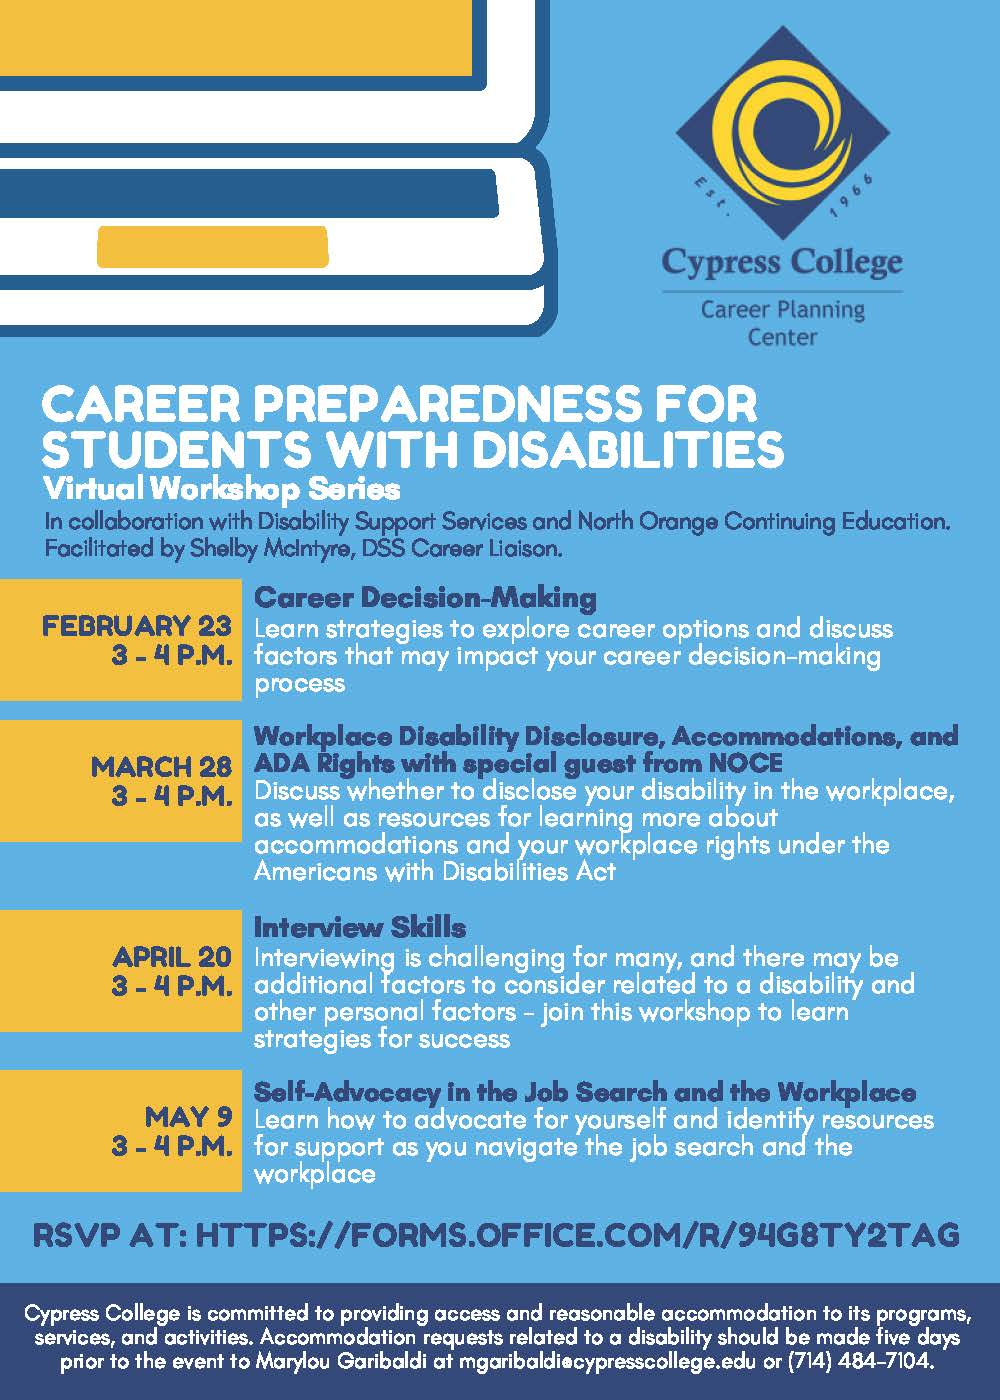 Career Preparedness for Students with Disabilities Workshop Series